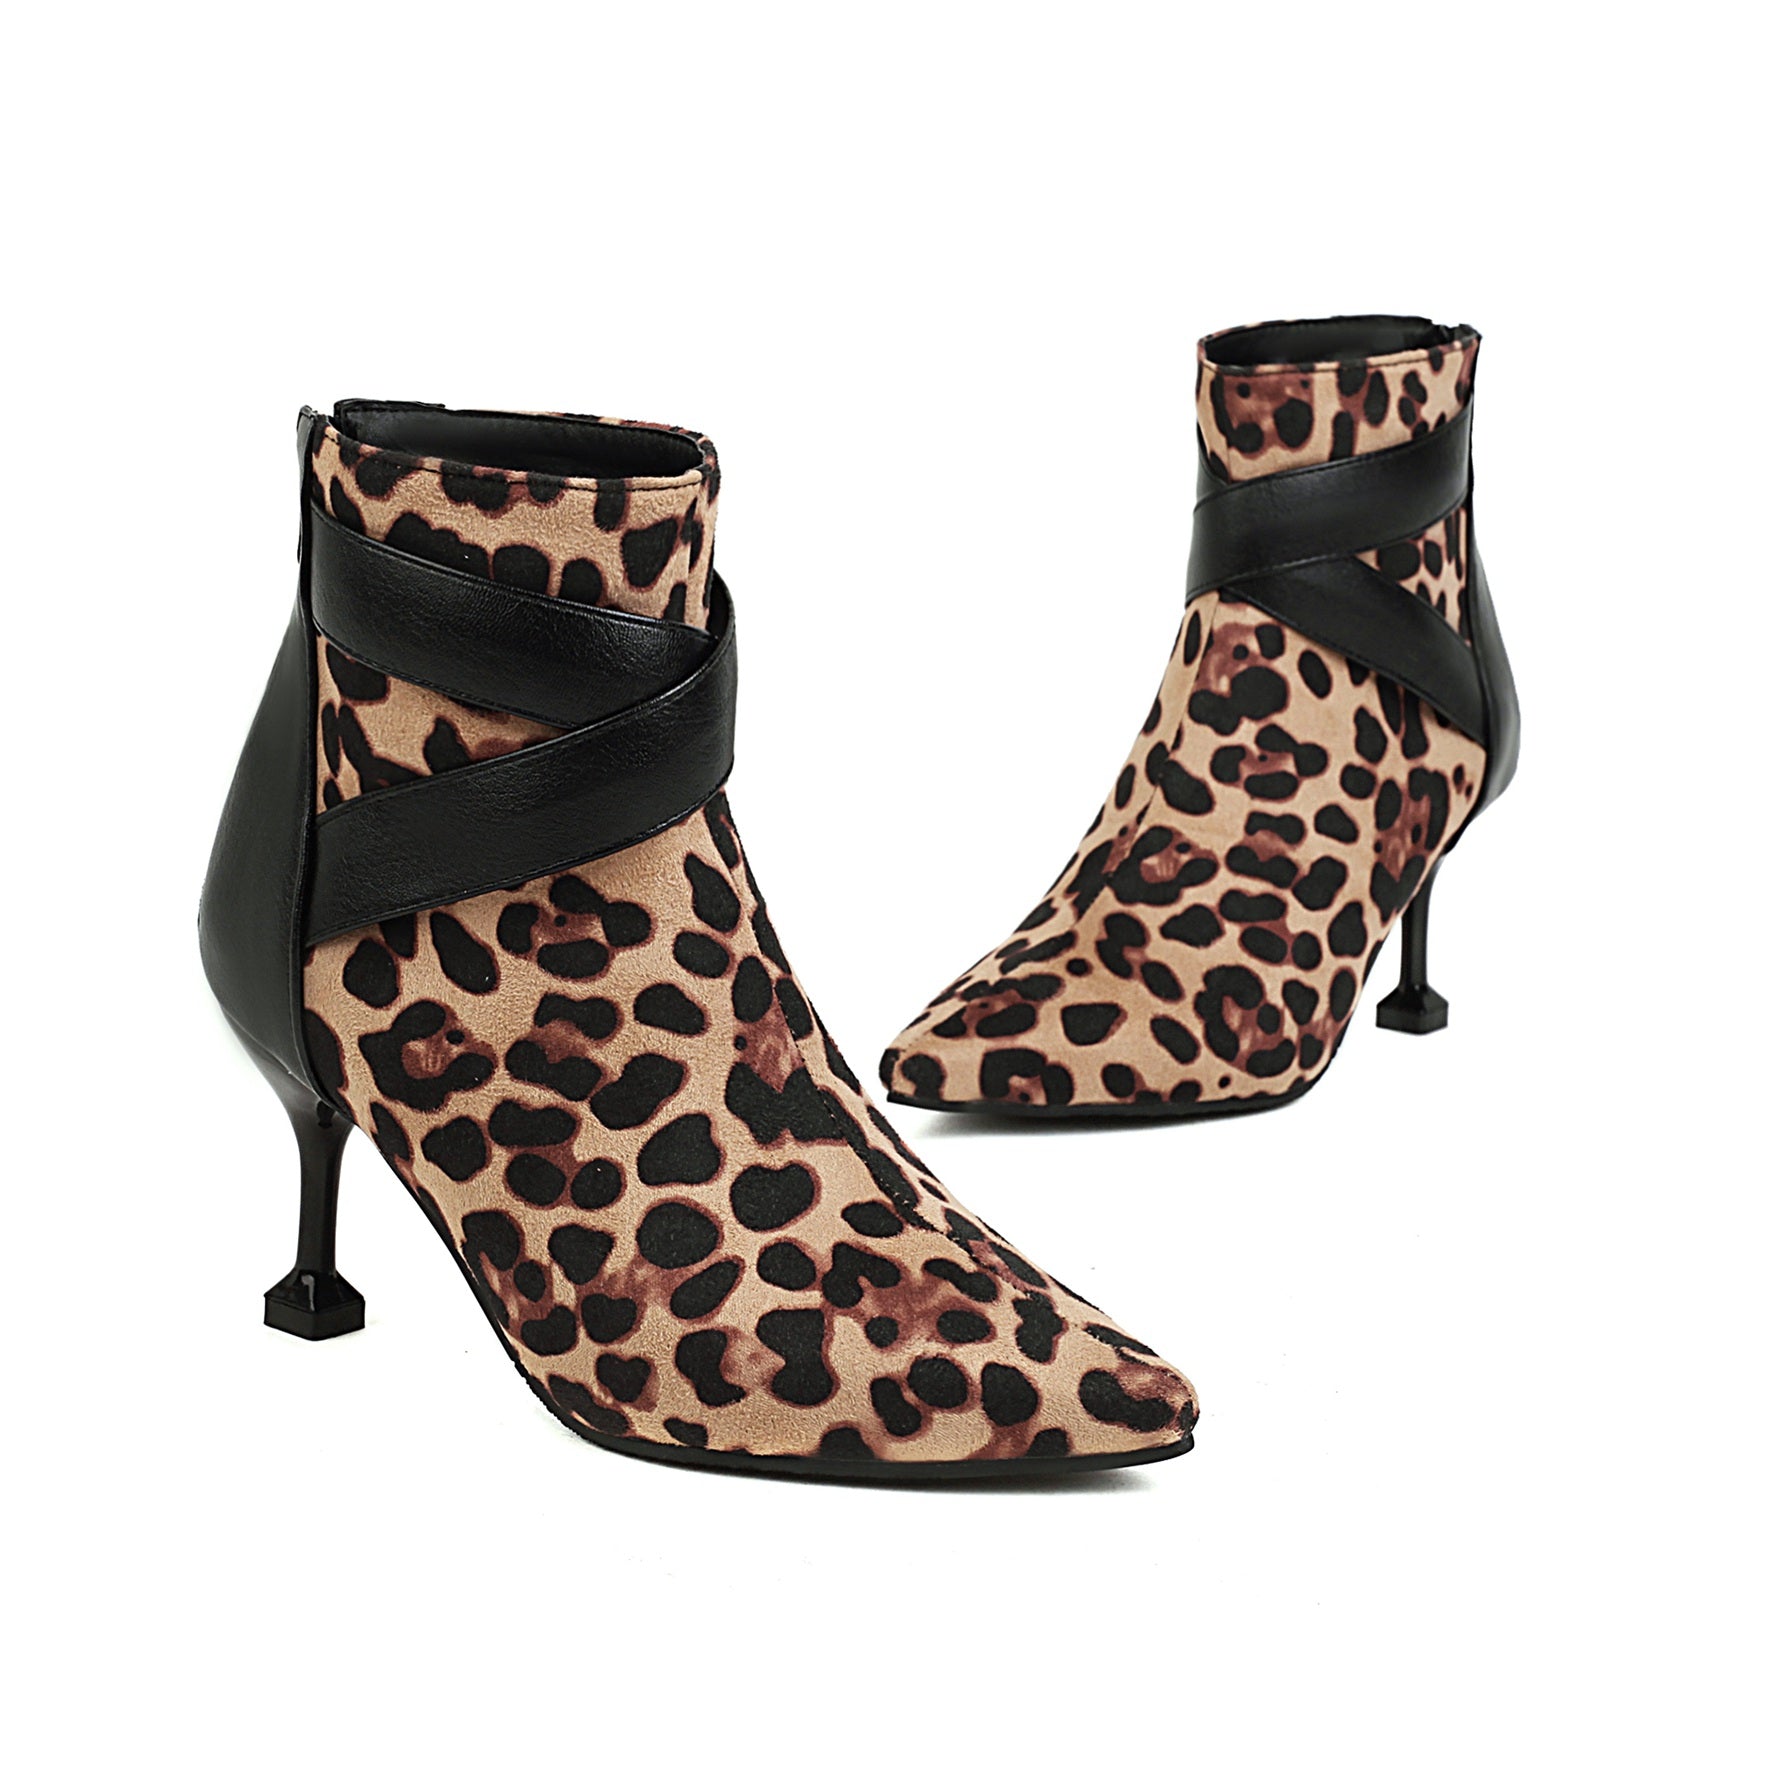 Bigsizeheels Sexy pointy zipper ankle boots - Leopard freeshipping - bigsizeheel®-size5-size15 -All Plus Sizes Available!